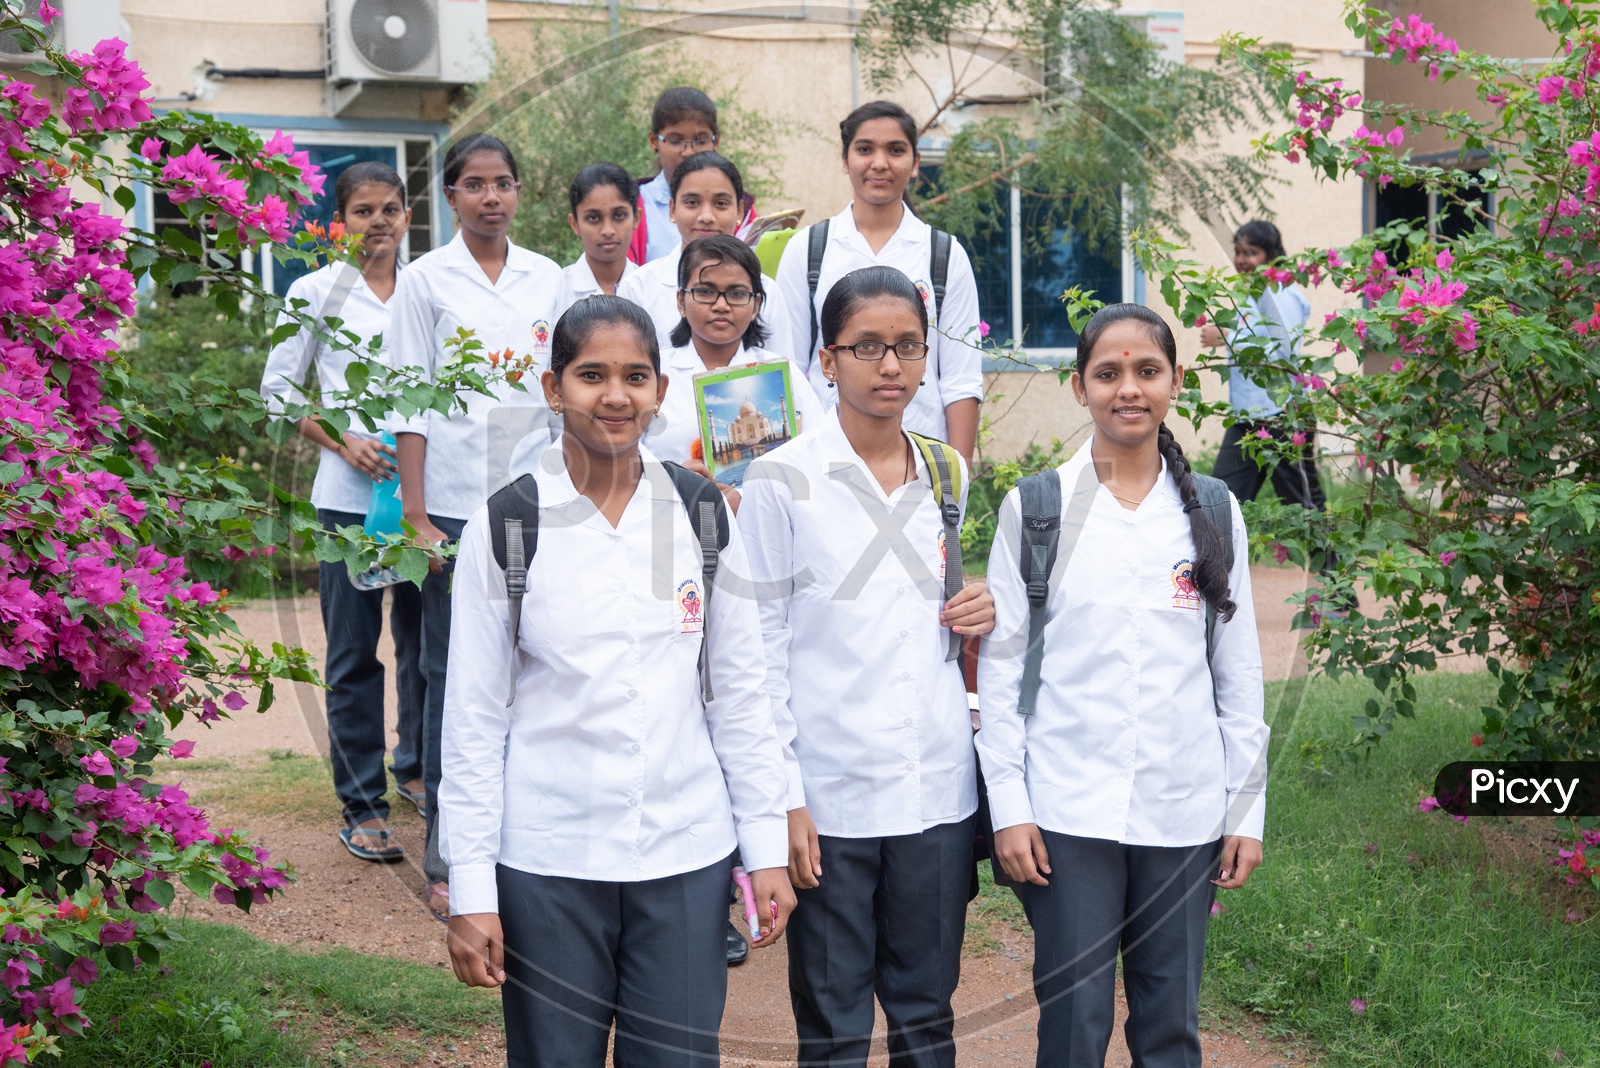 Girl students at an educational institute in Hyderabad